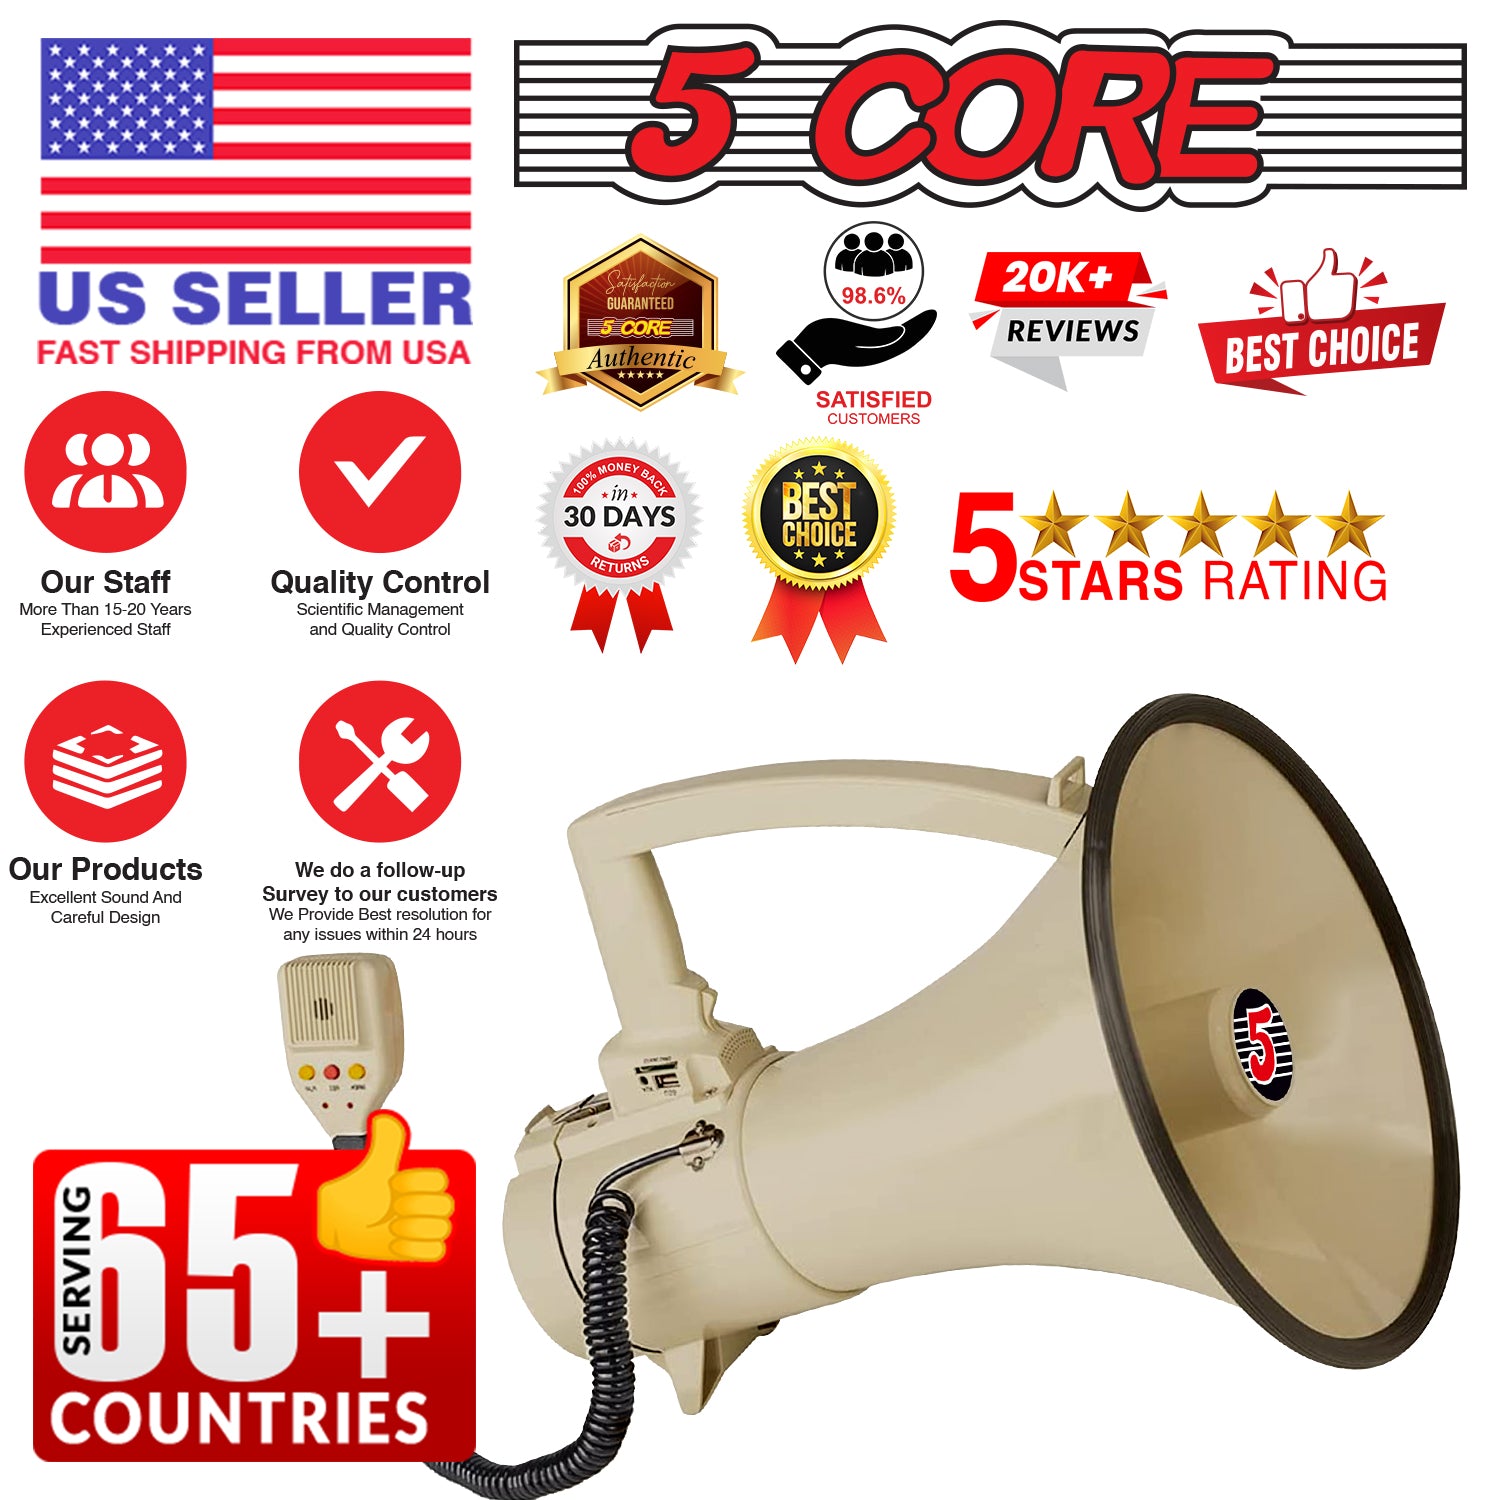 Easy-to-Use Controls - 5 Core Megaphone Speaker Offers Convenient Operation